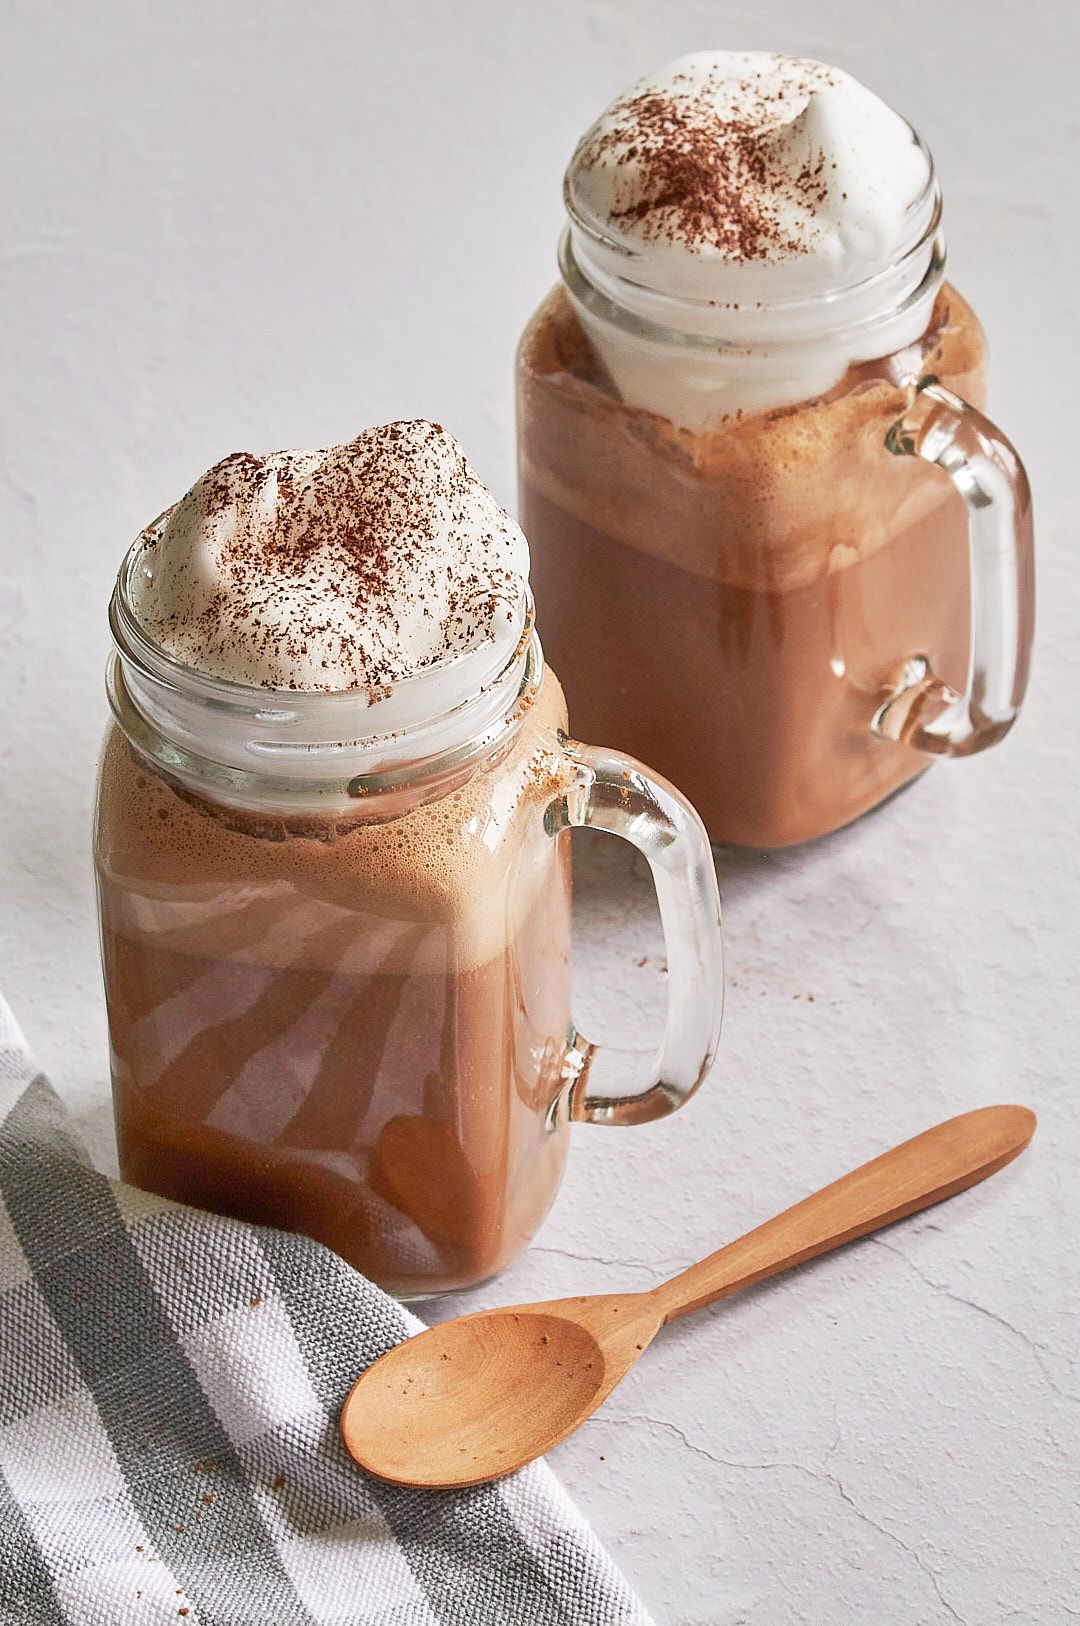 Two clear glass mason jar mugs with hot cocoa with whipped cream dripping on top with a wooden spoon in front of them and a grey and white checkered towel in bottom left corner.